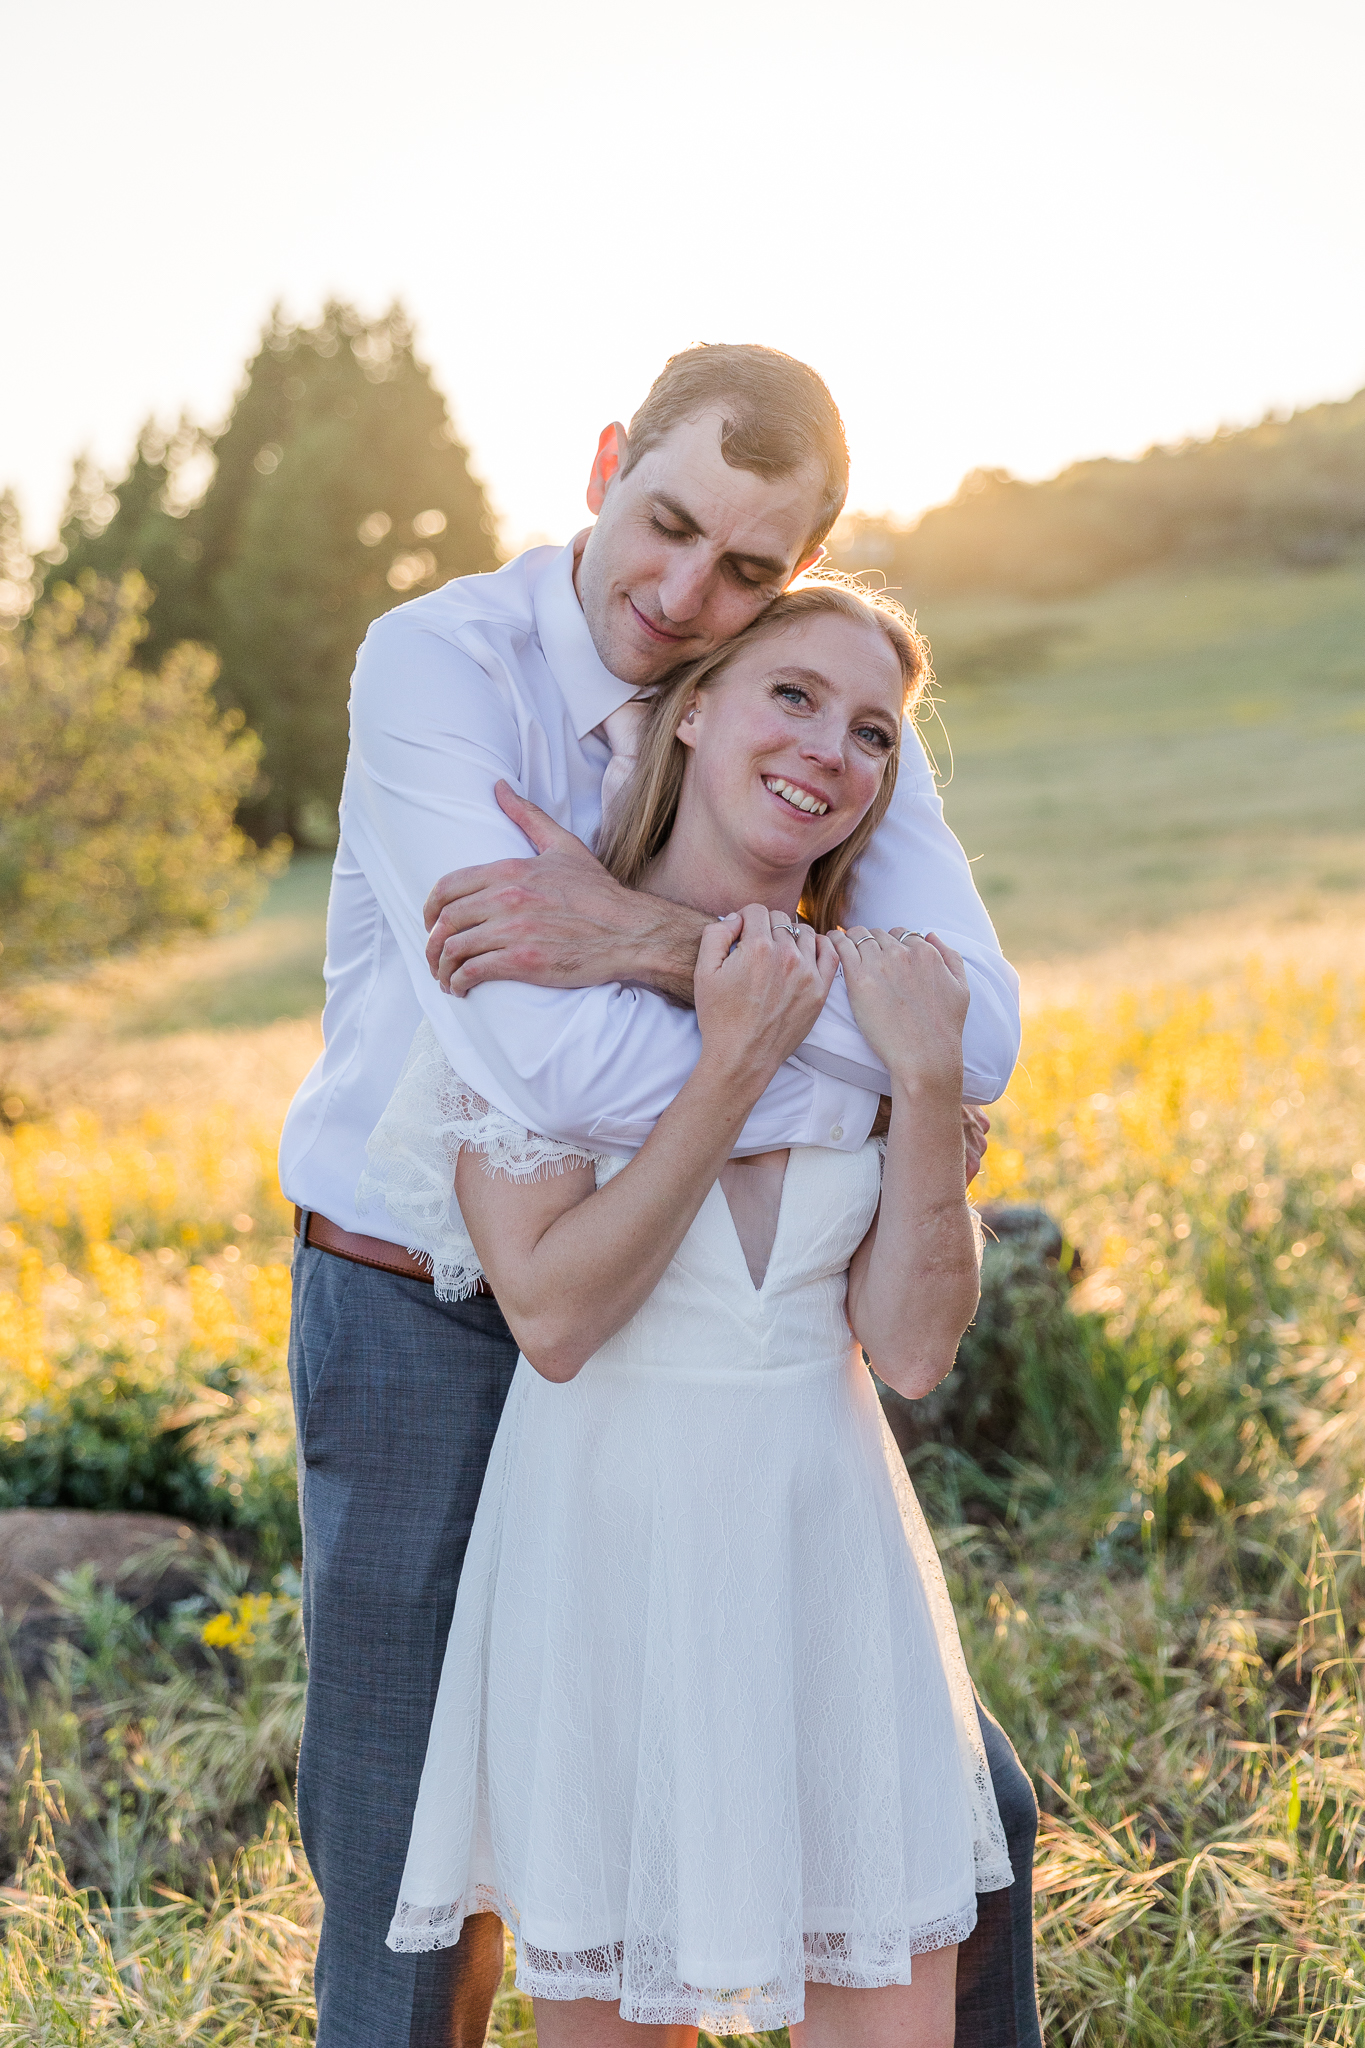 Rustic Wedding at Calico Orchards in Julian and reception at The Ole Firehouse at Lake Cuyamaca